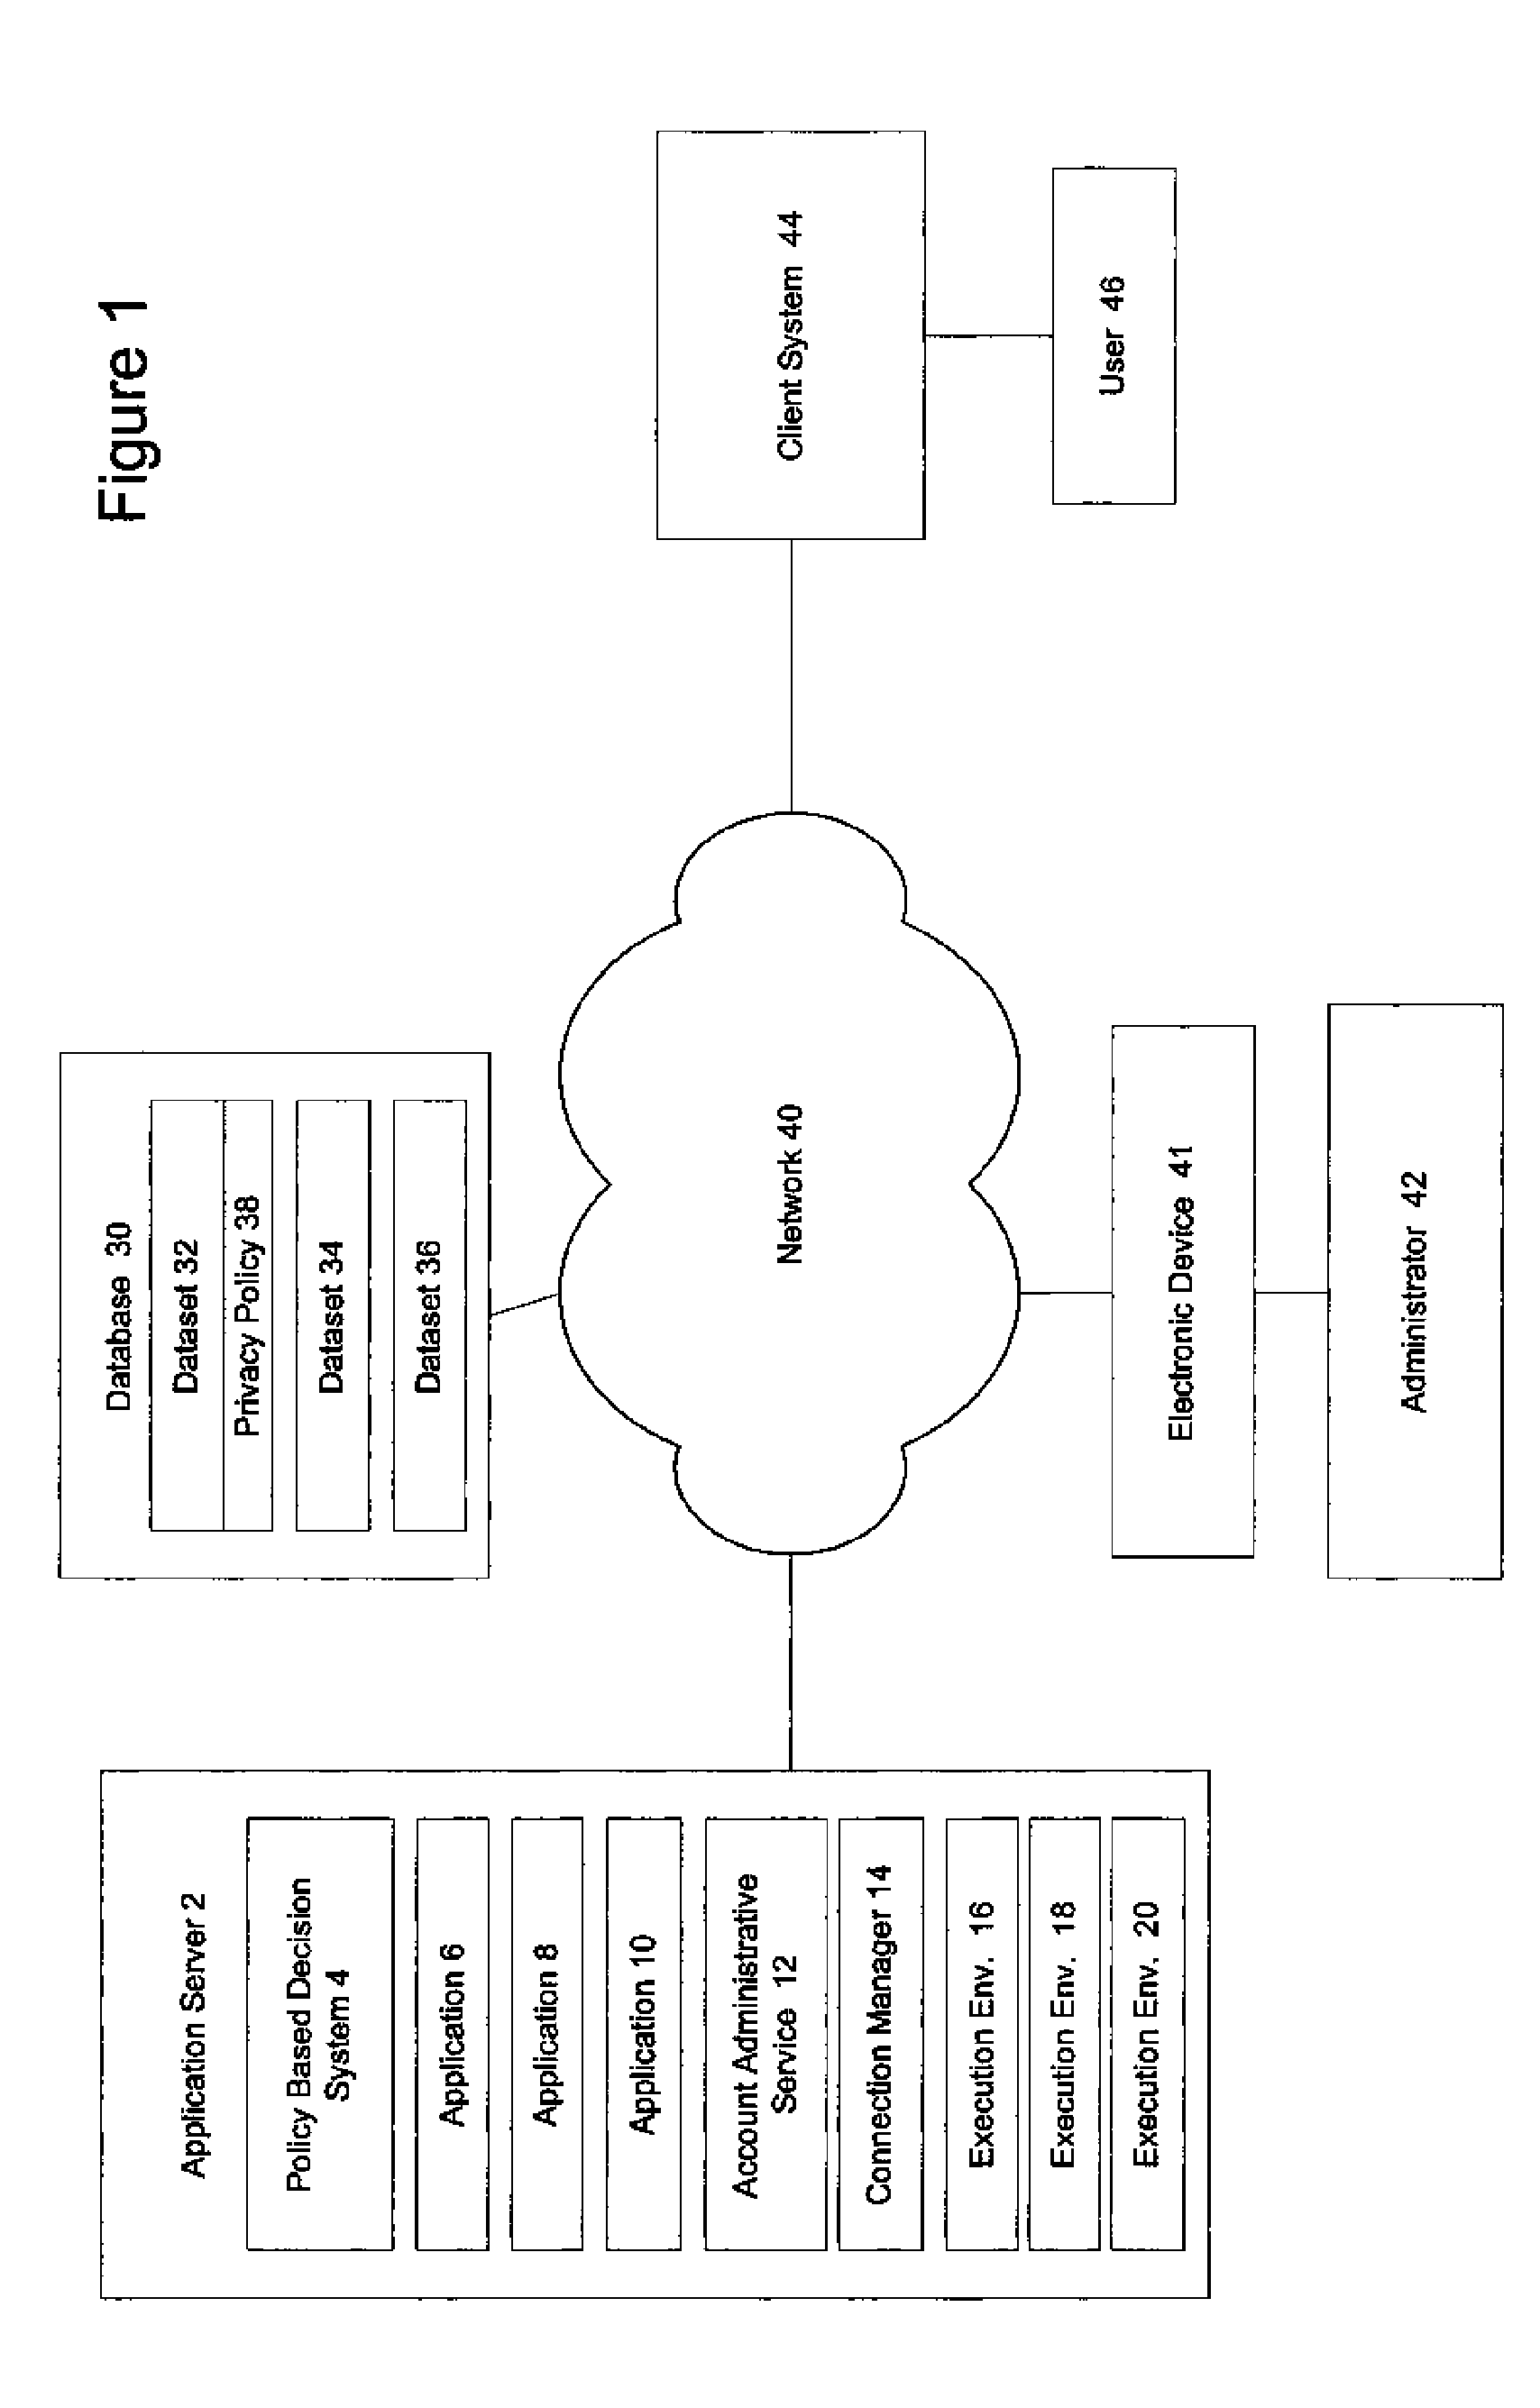 System and method for executing interactive applications with minimal privileges